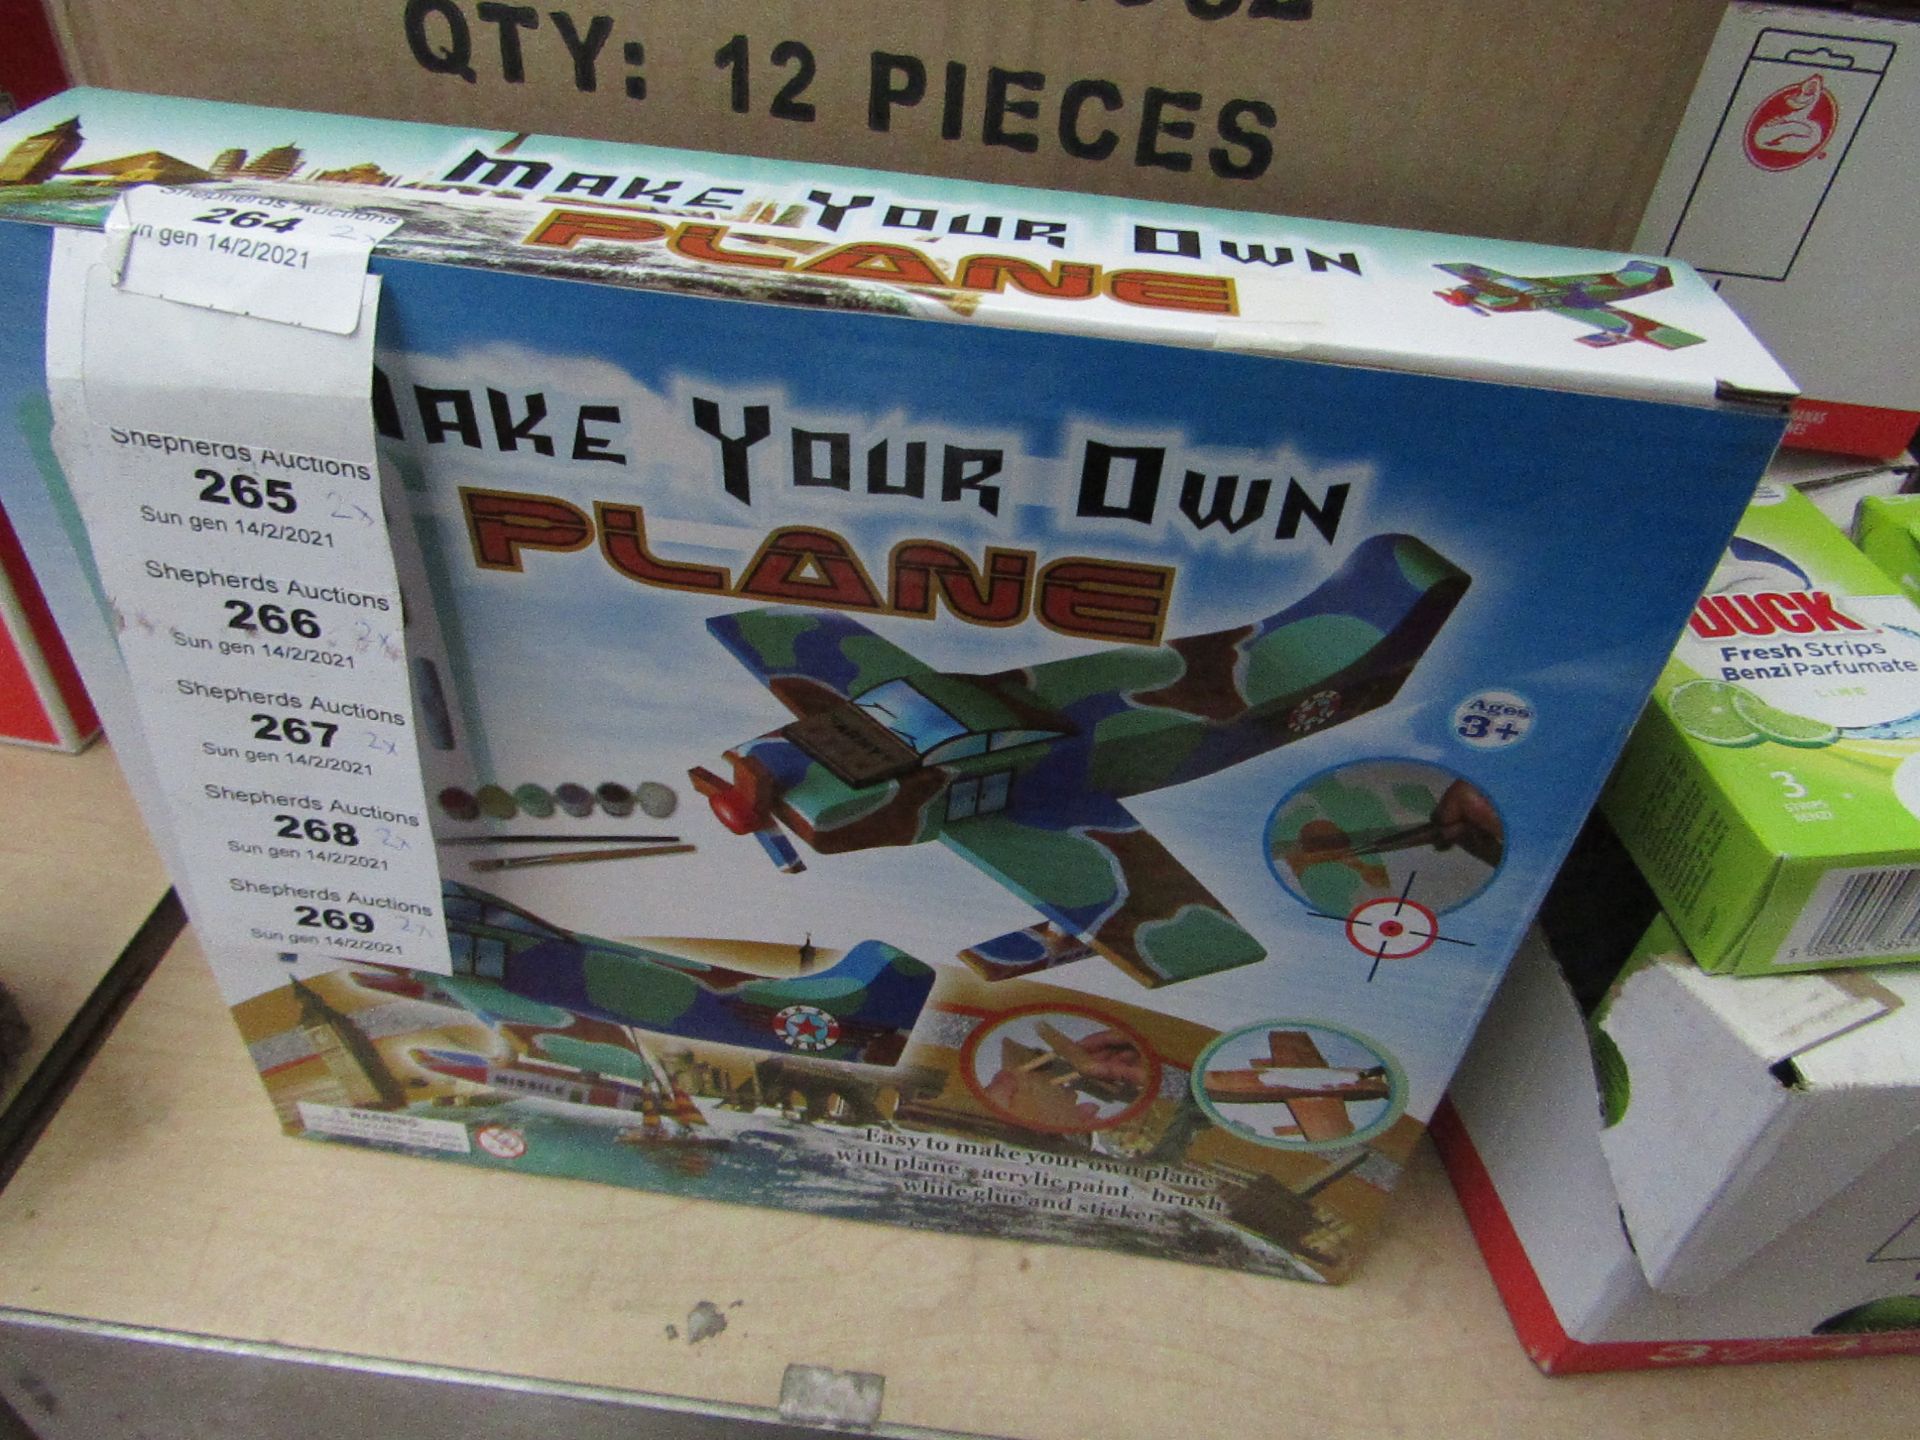 2x Make your own plane, New & Boxed